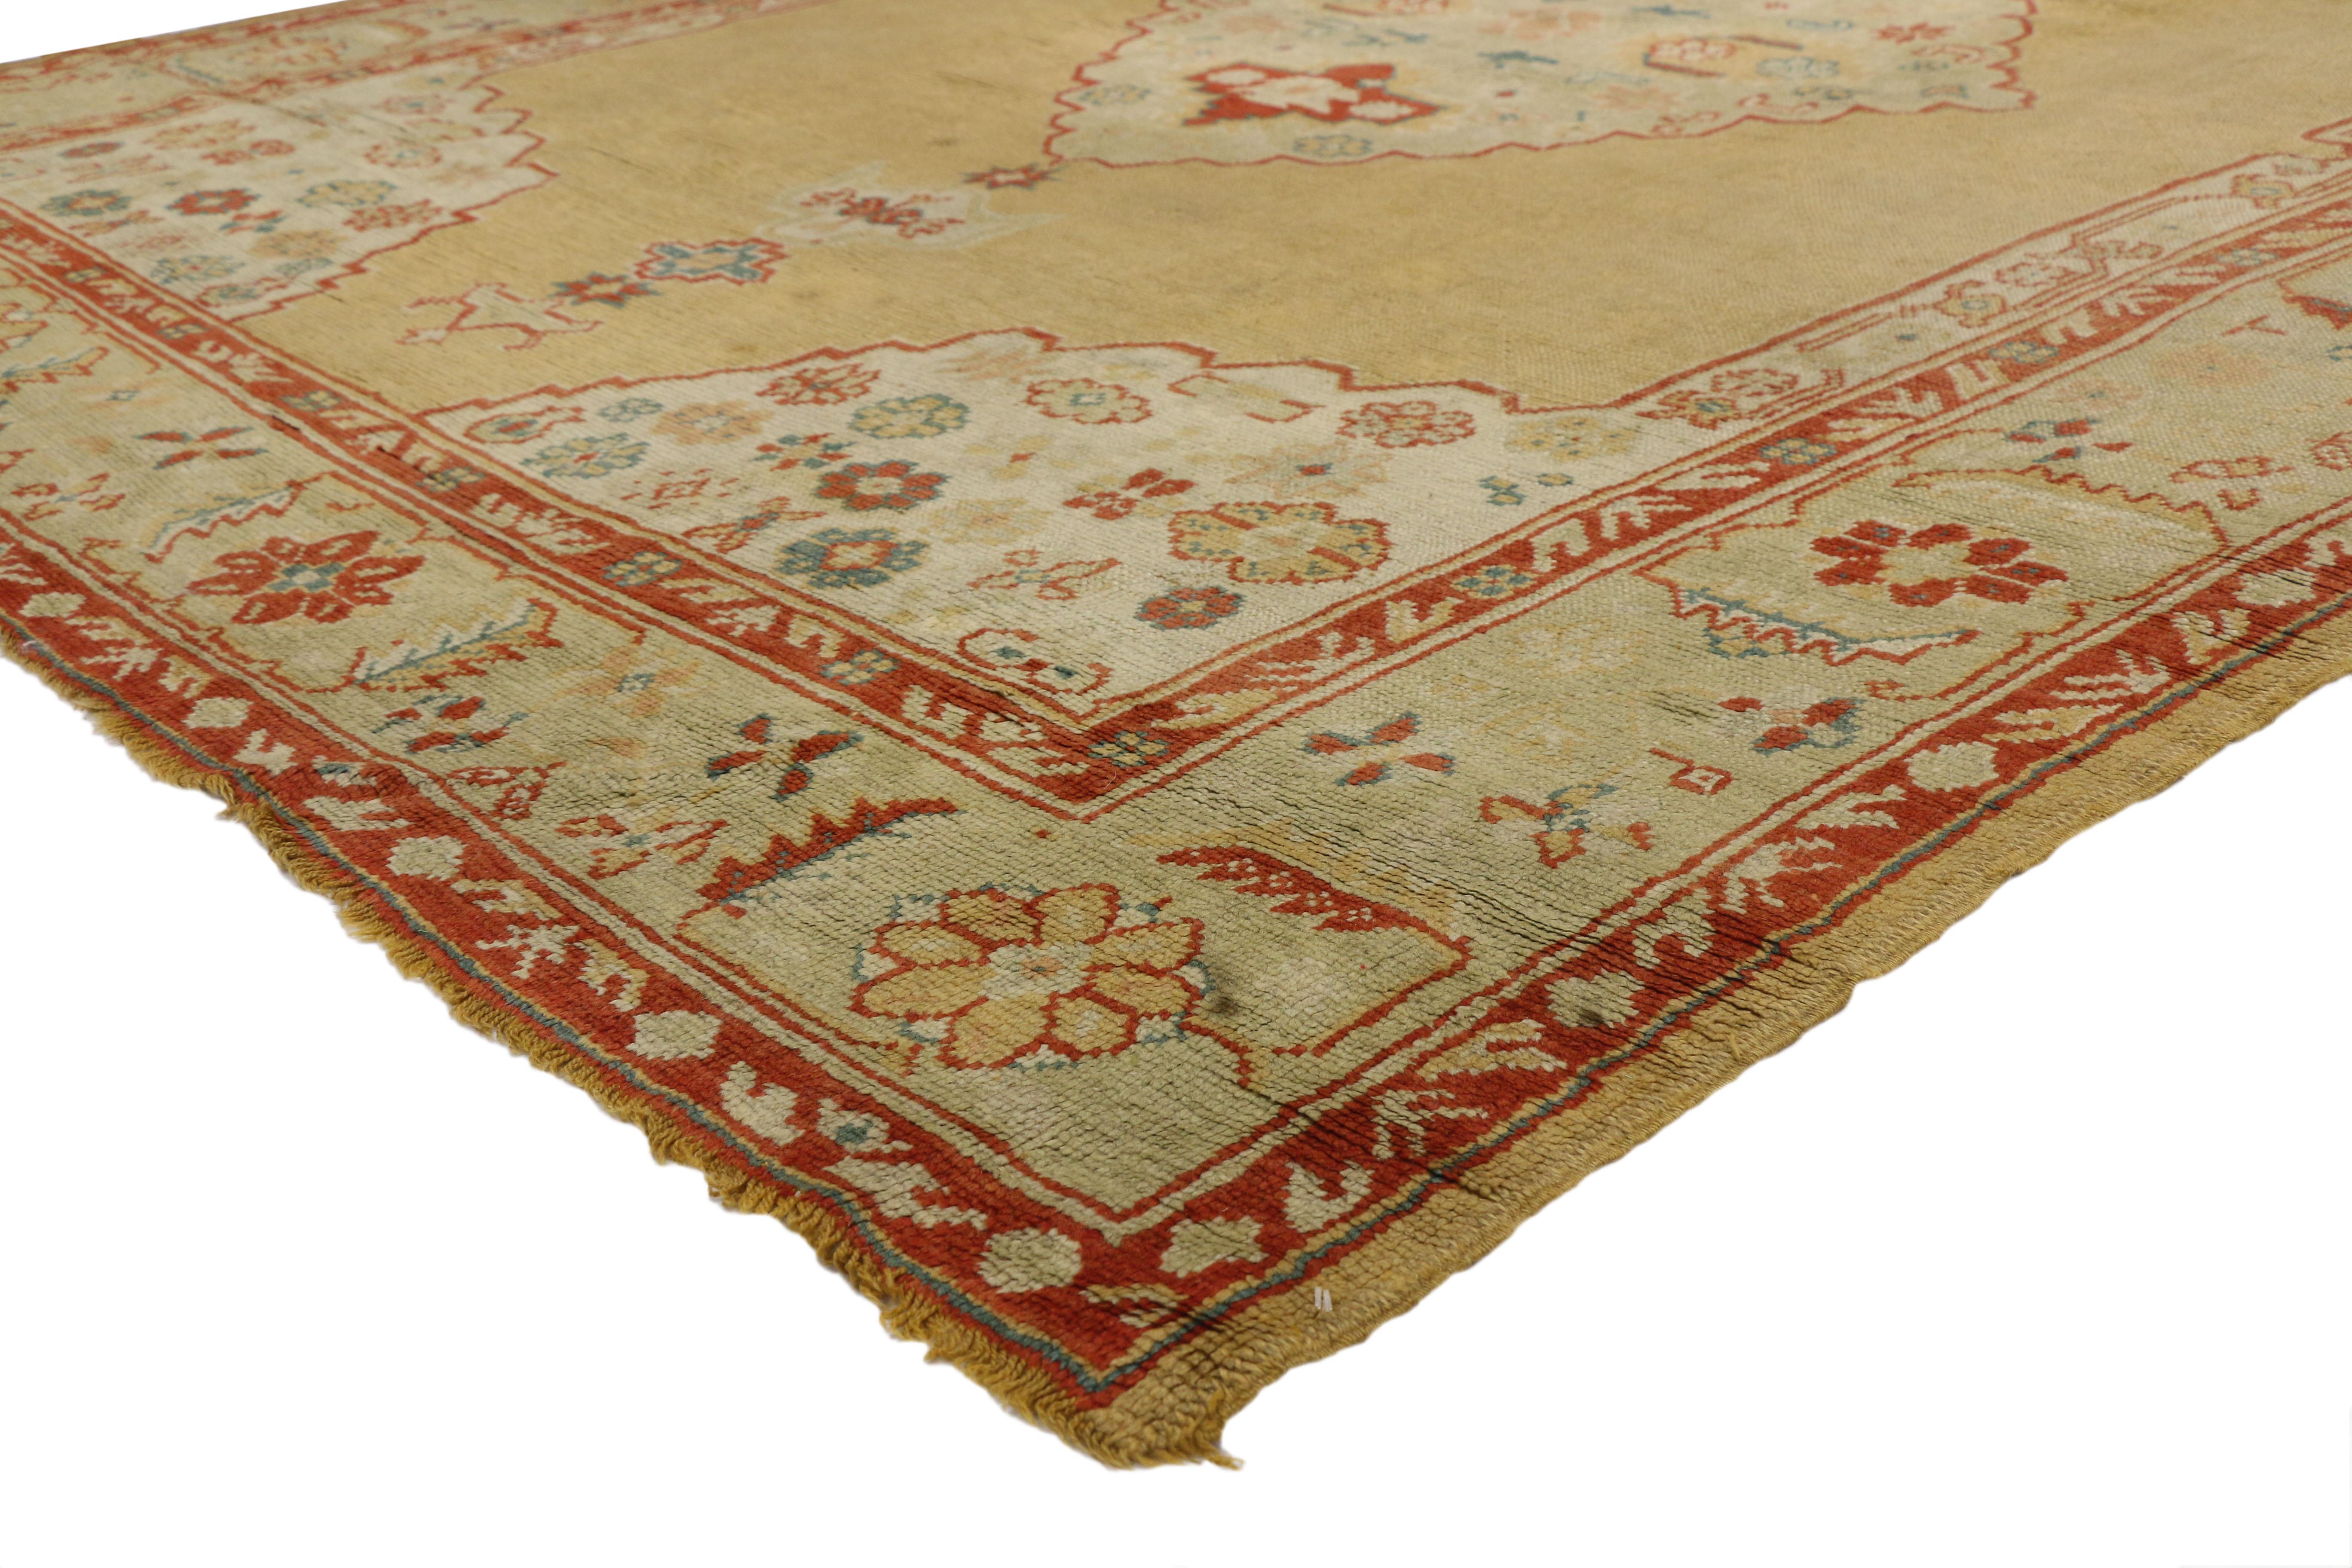 74032 Antique Turkish Oushak Rug, 09'03 x 11'10. In the heart of this antique Turkish Oushak rug lies a symbolic medallion, adorned with Anatolian motifs that speak to ancient traditions and timeless wisdom. Against a backdrop of golden saffron, the